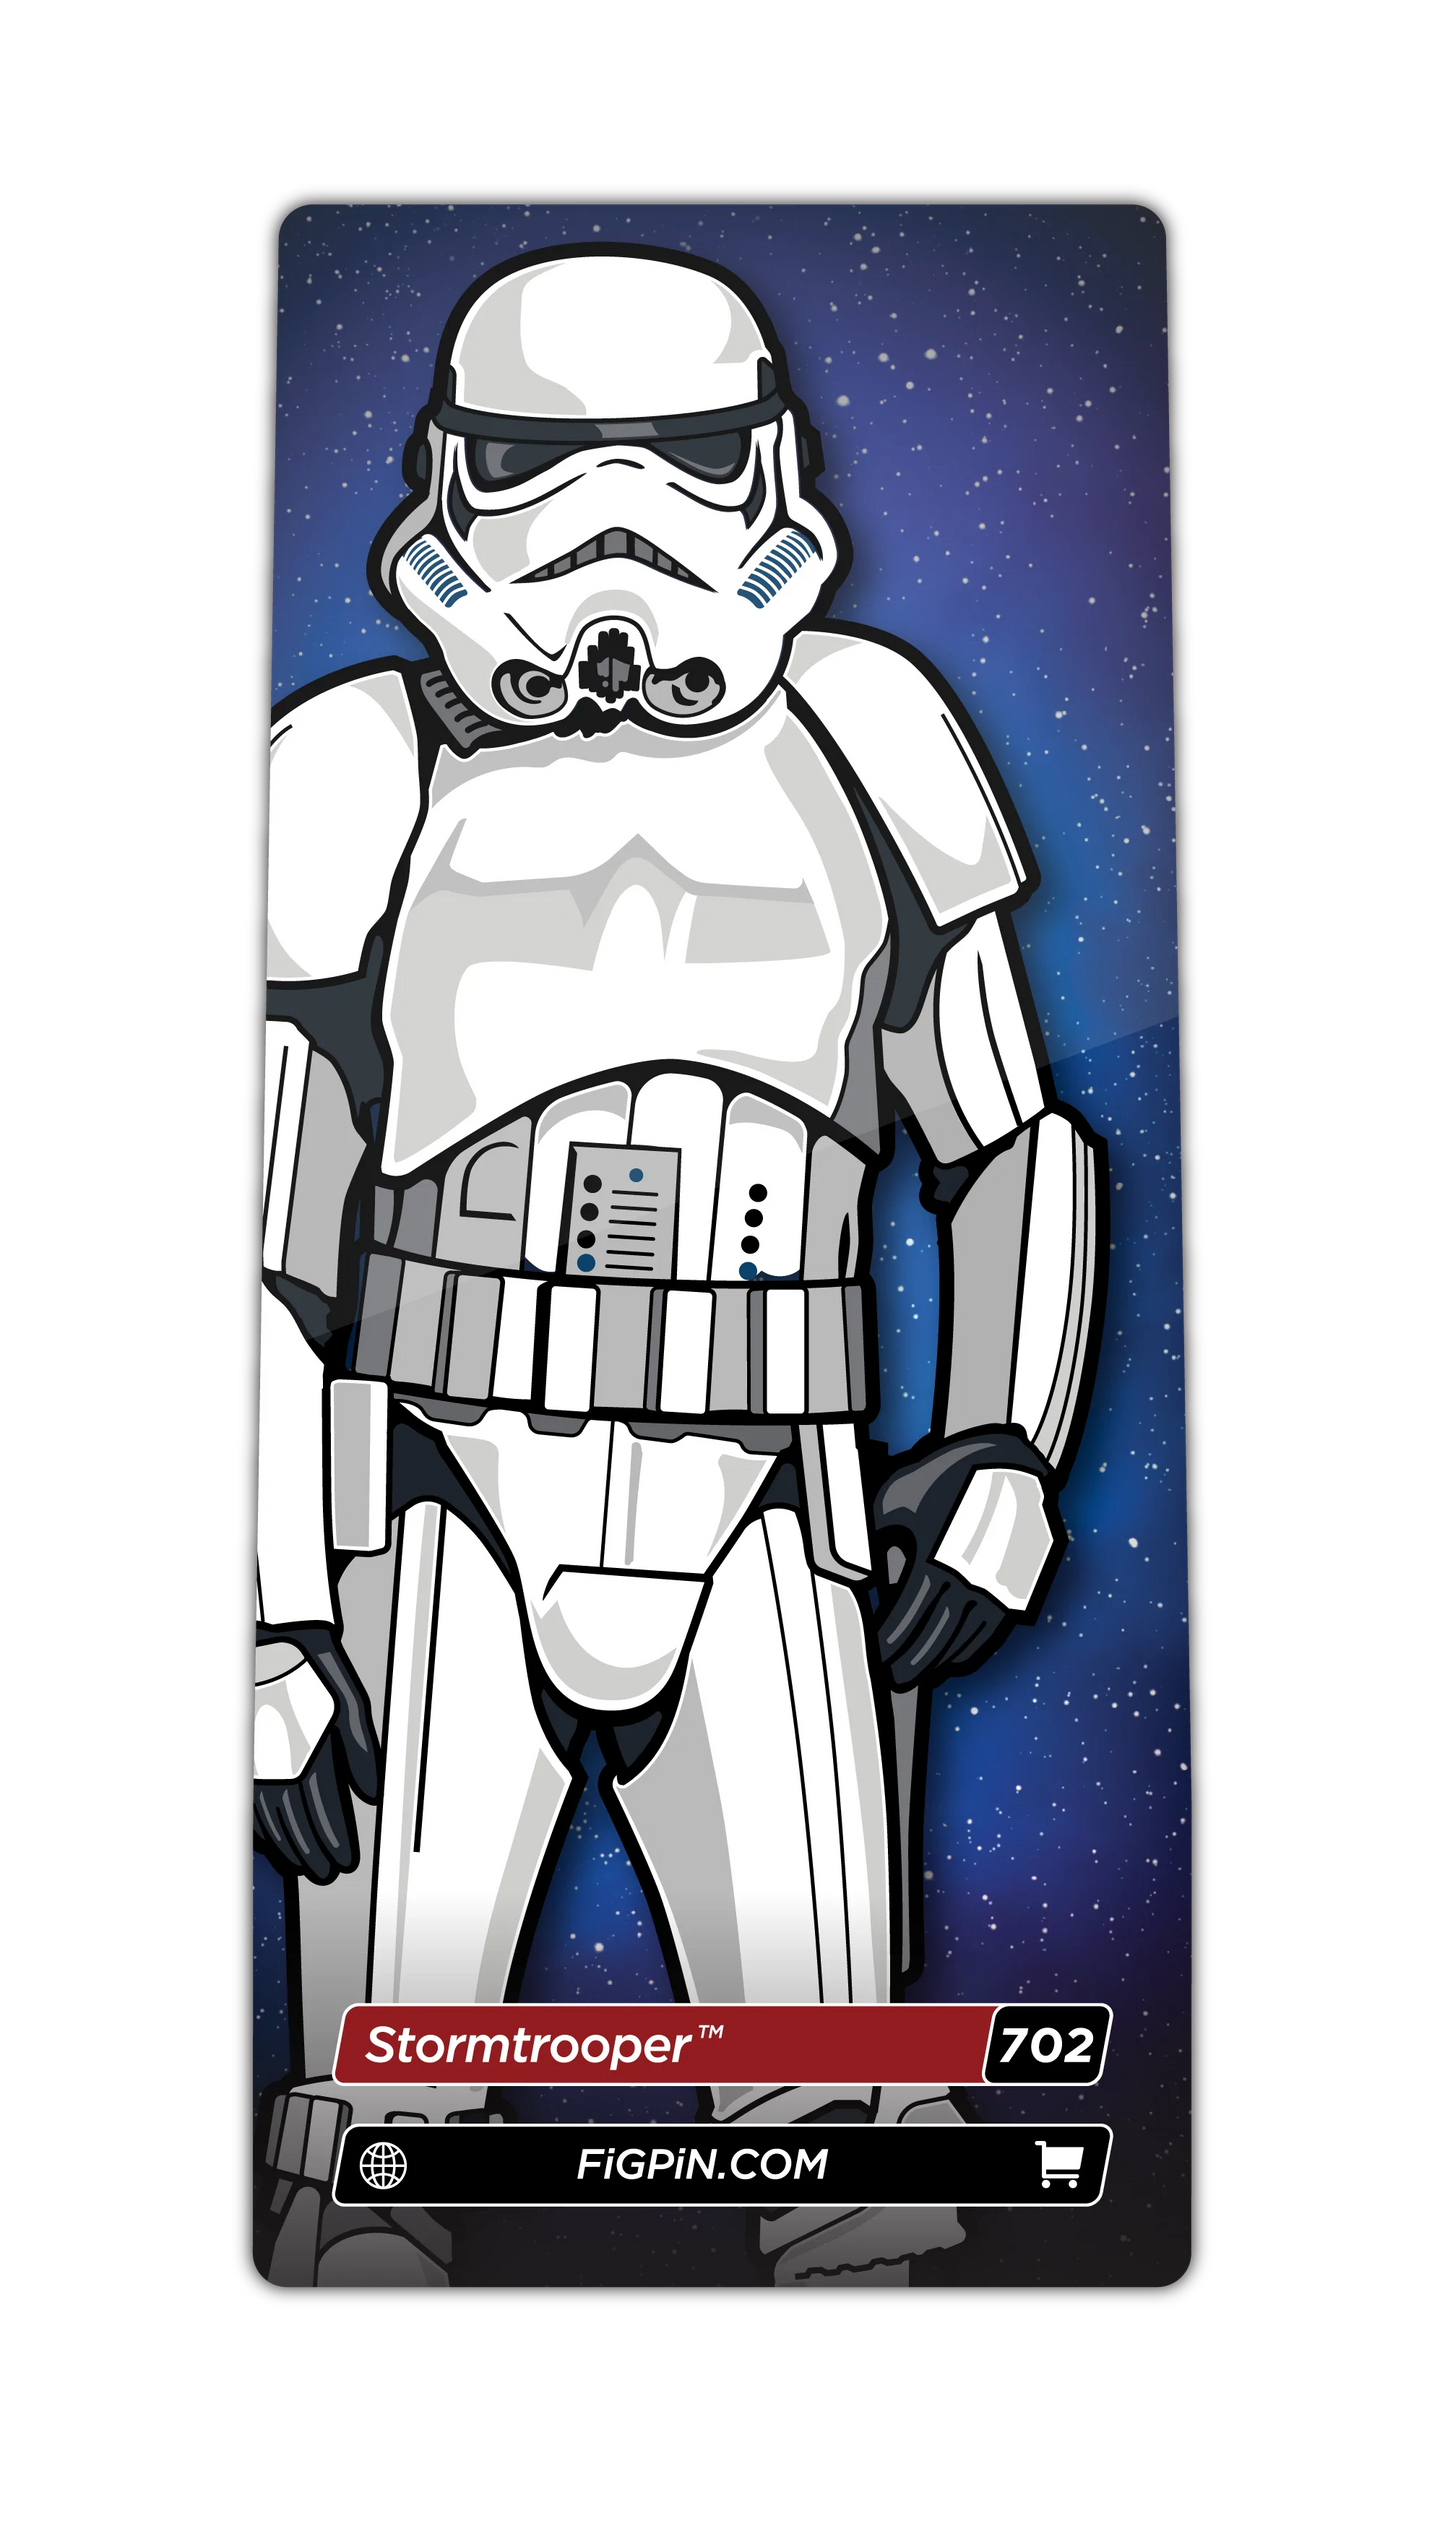 FiGPiN Stormtrooper (702) Property: Star Wars A New Hope